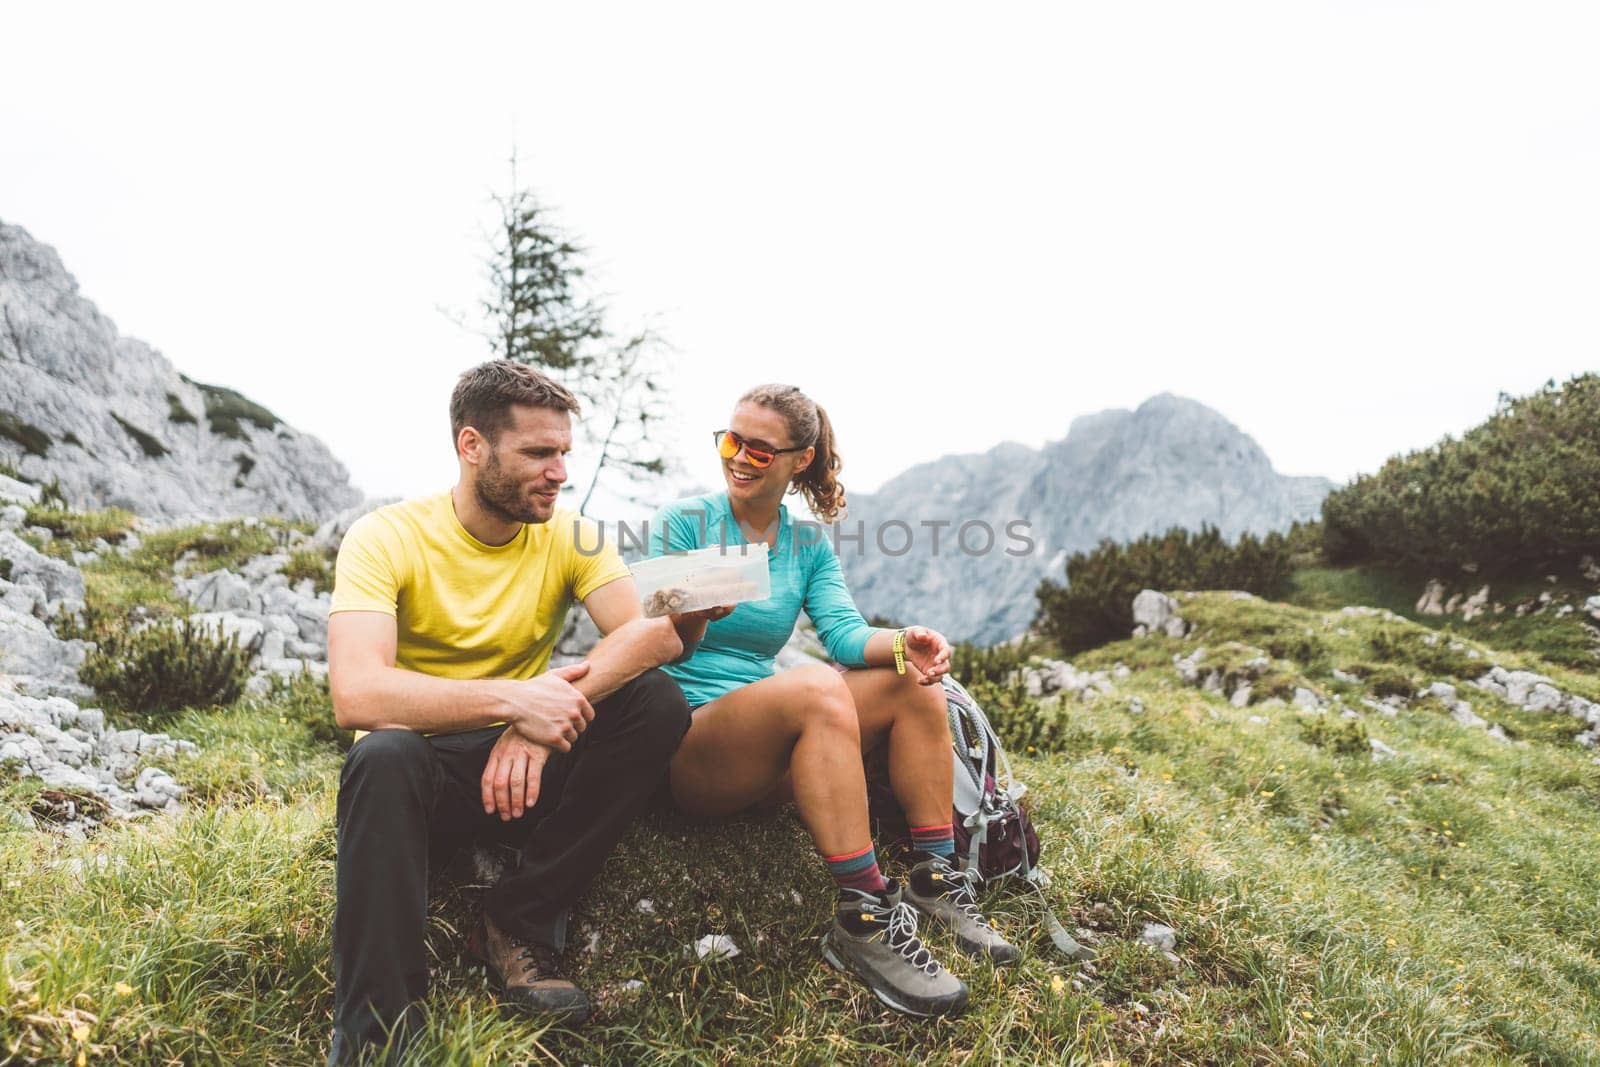 Couple of hikers sitting down on a grass field up in the mountains taking a stop for lunch break by VisualProductions